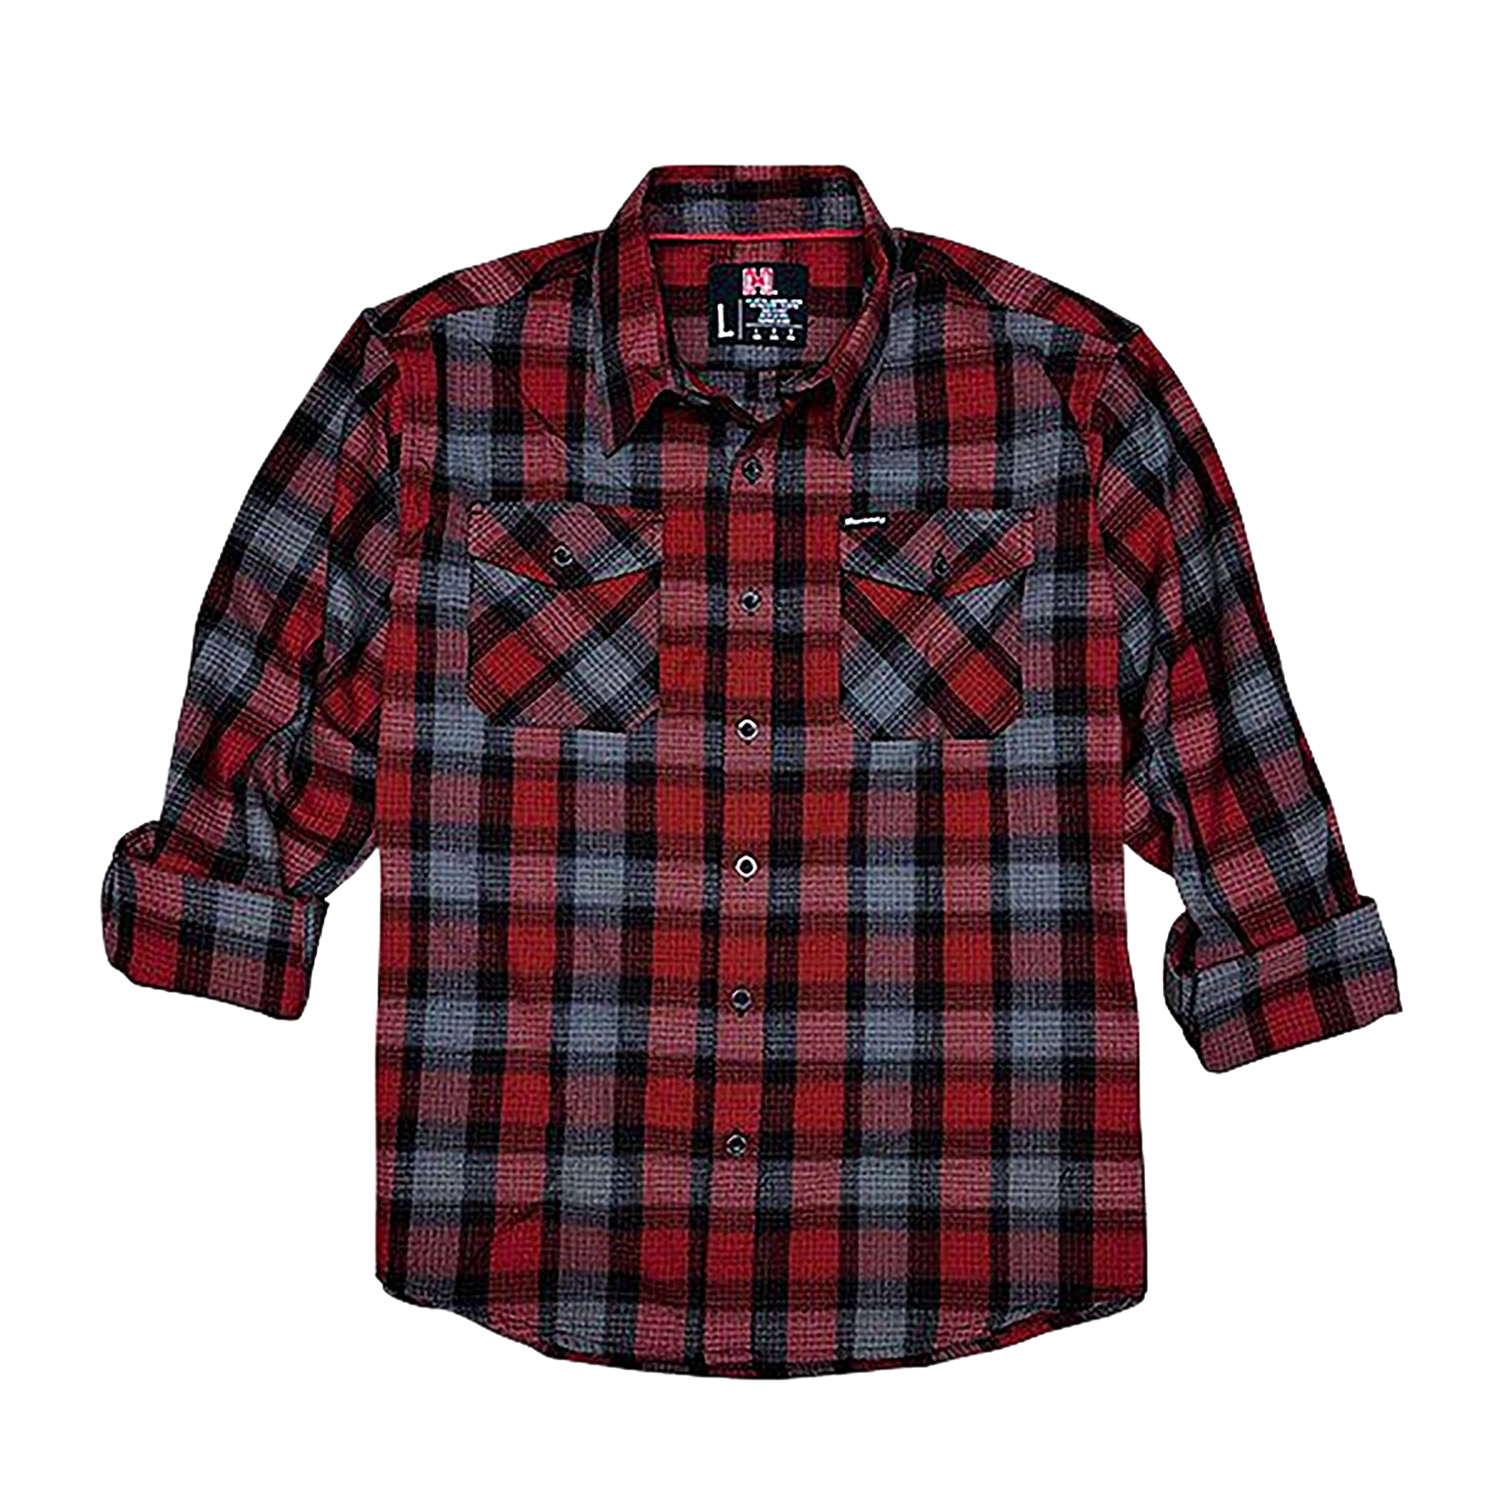 Hornady Gear 32195 Flannel Shirt 2Xl Red/Black/Gray, Cotton/Polyester, Relaxed Fit Button Up